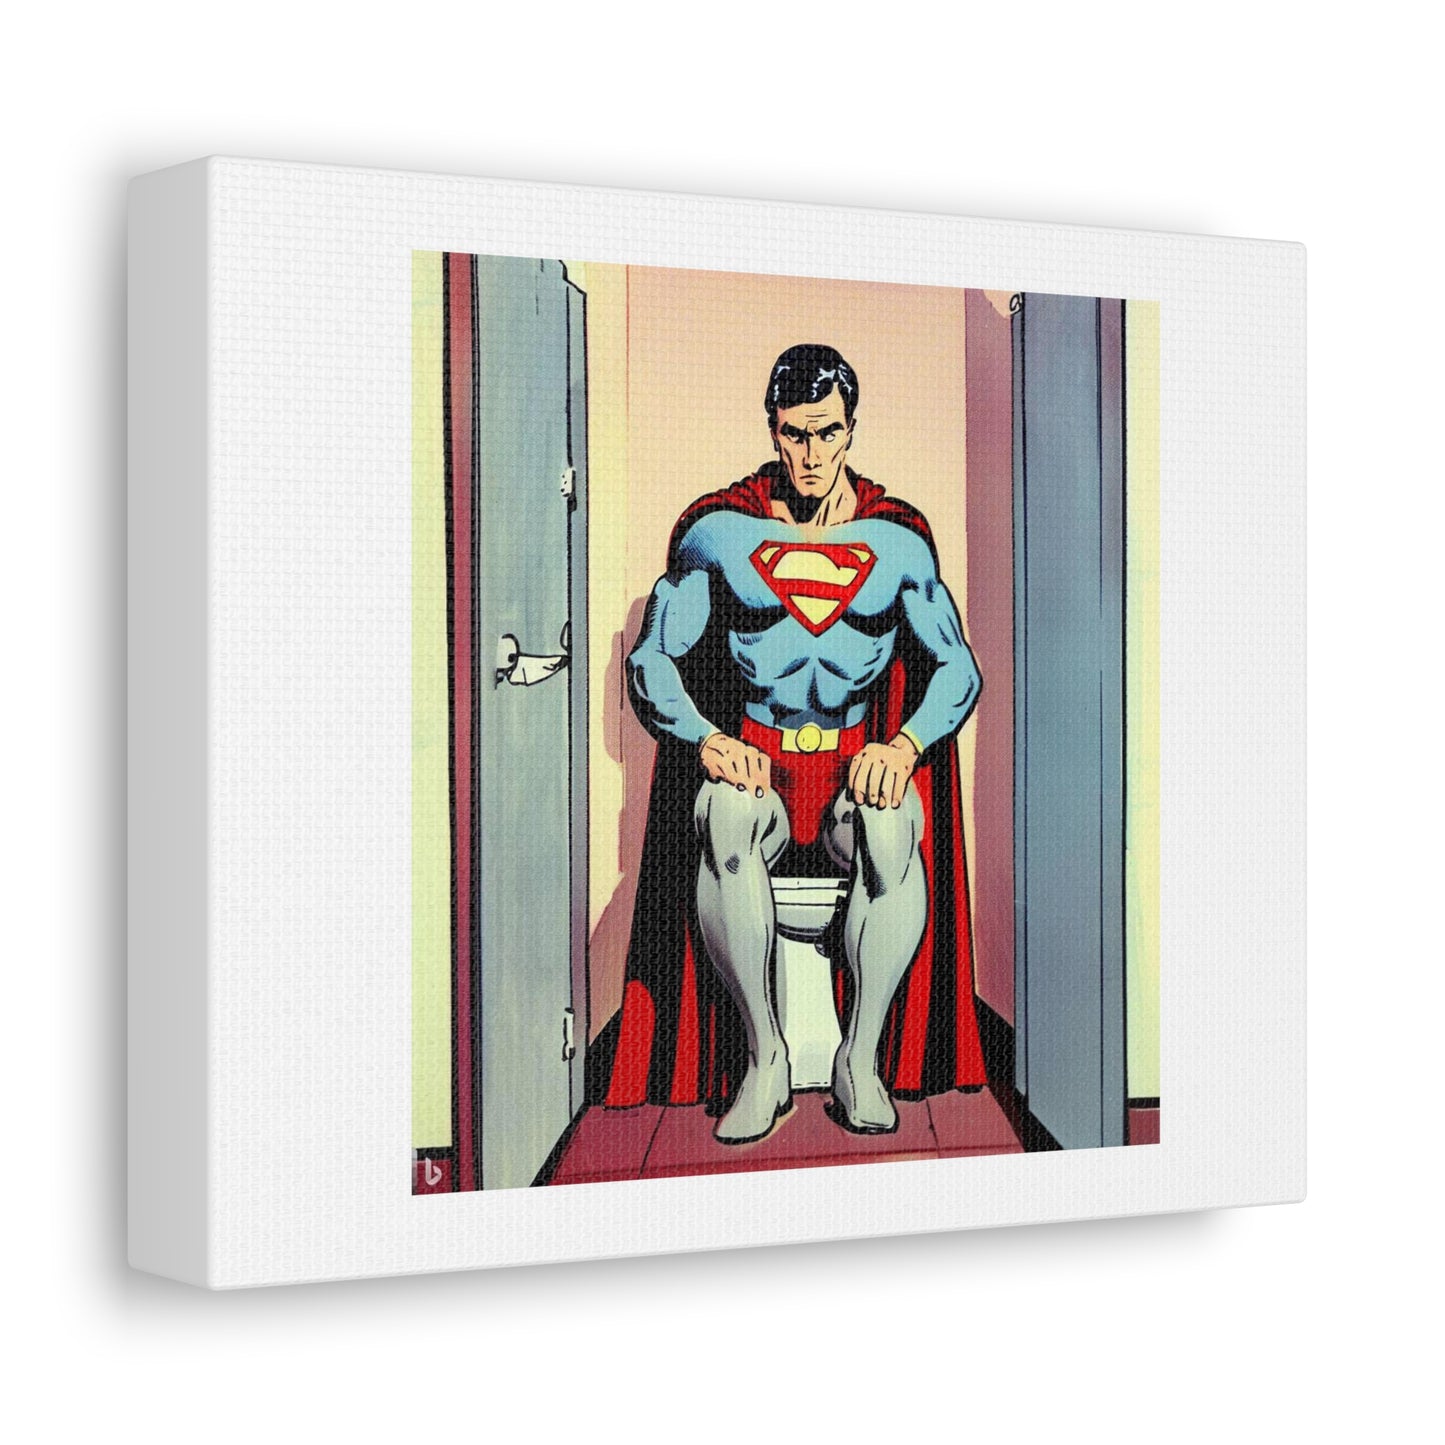 Superman Sitting in a Toilet Cubical 1930s Comic Style digital art 'Designed by AI' on Canvas